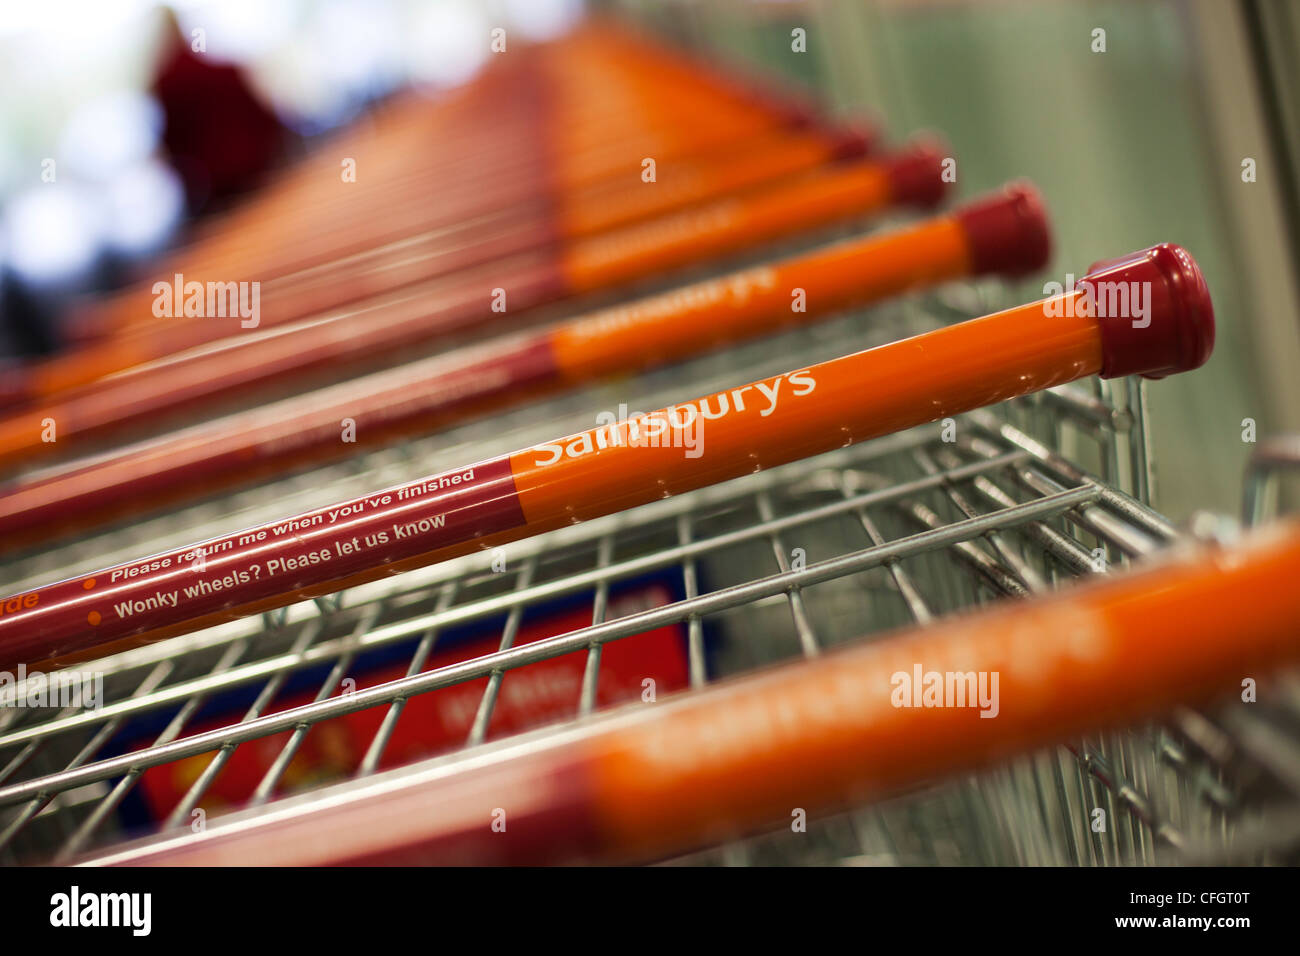 Sainsbury's shopping trolleys in a row showing the word Sainsbury's on the handles Stock Photo